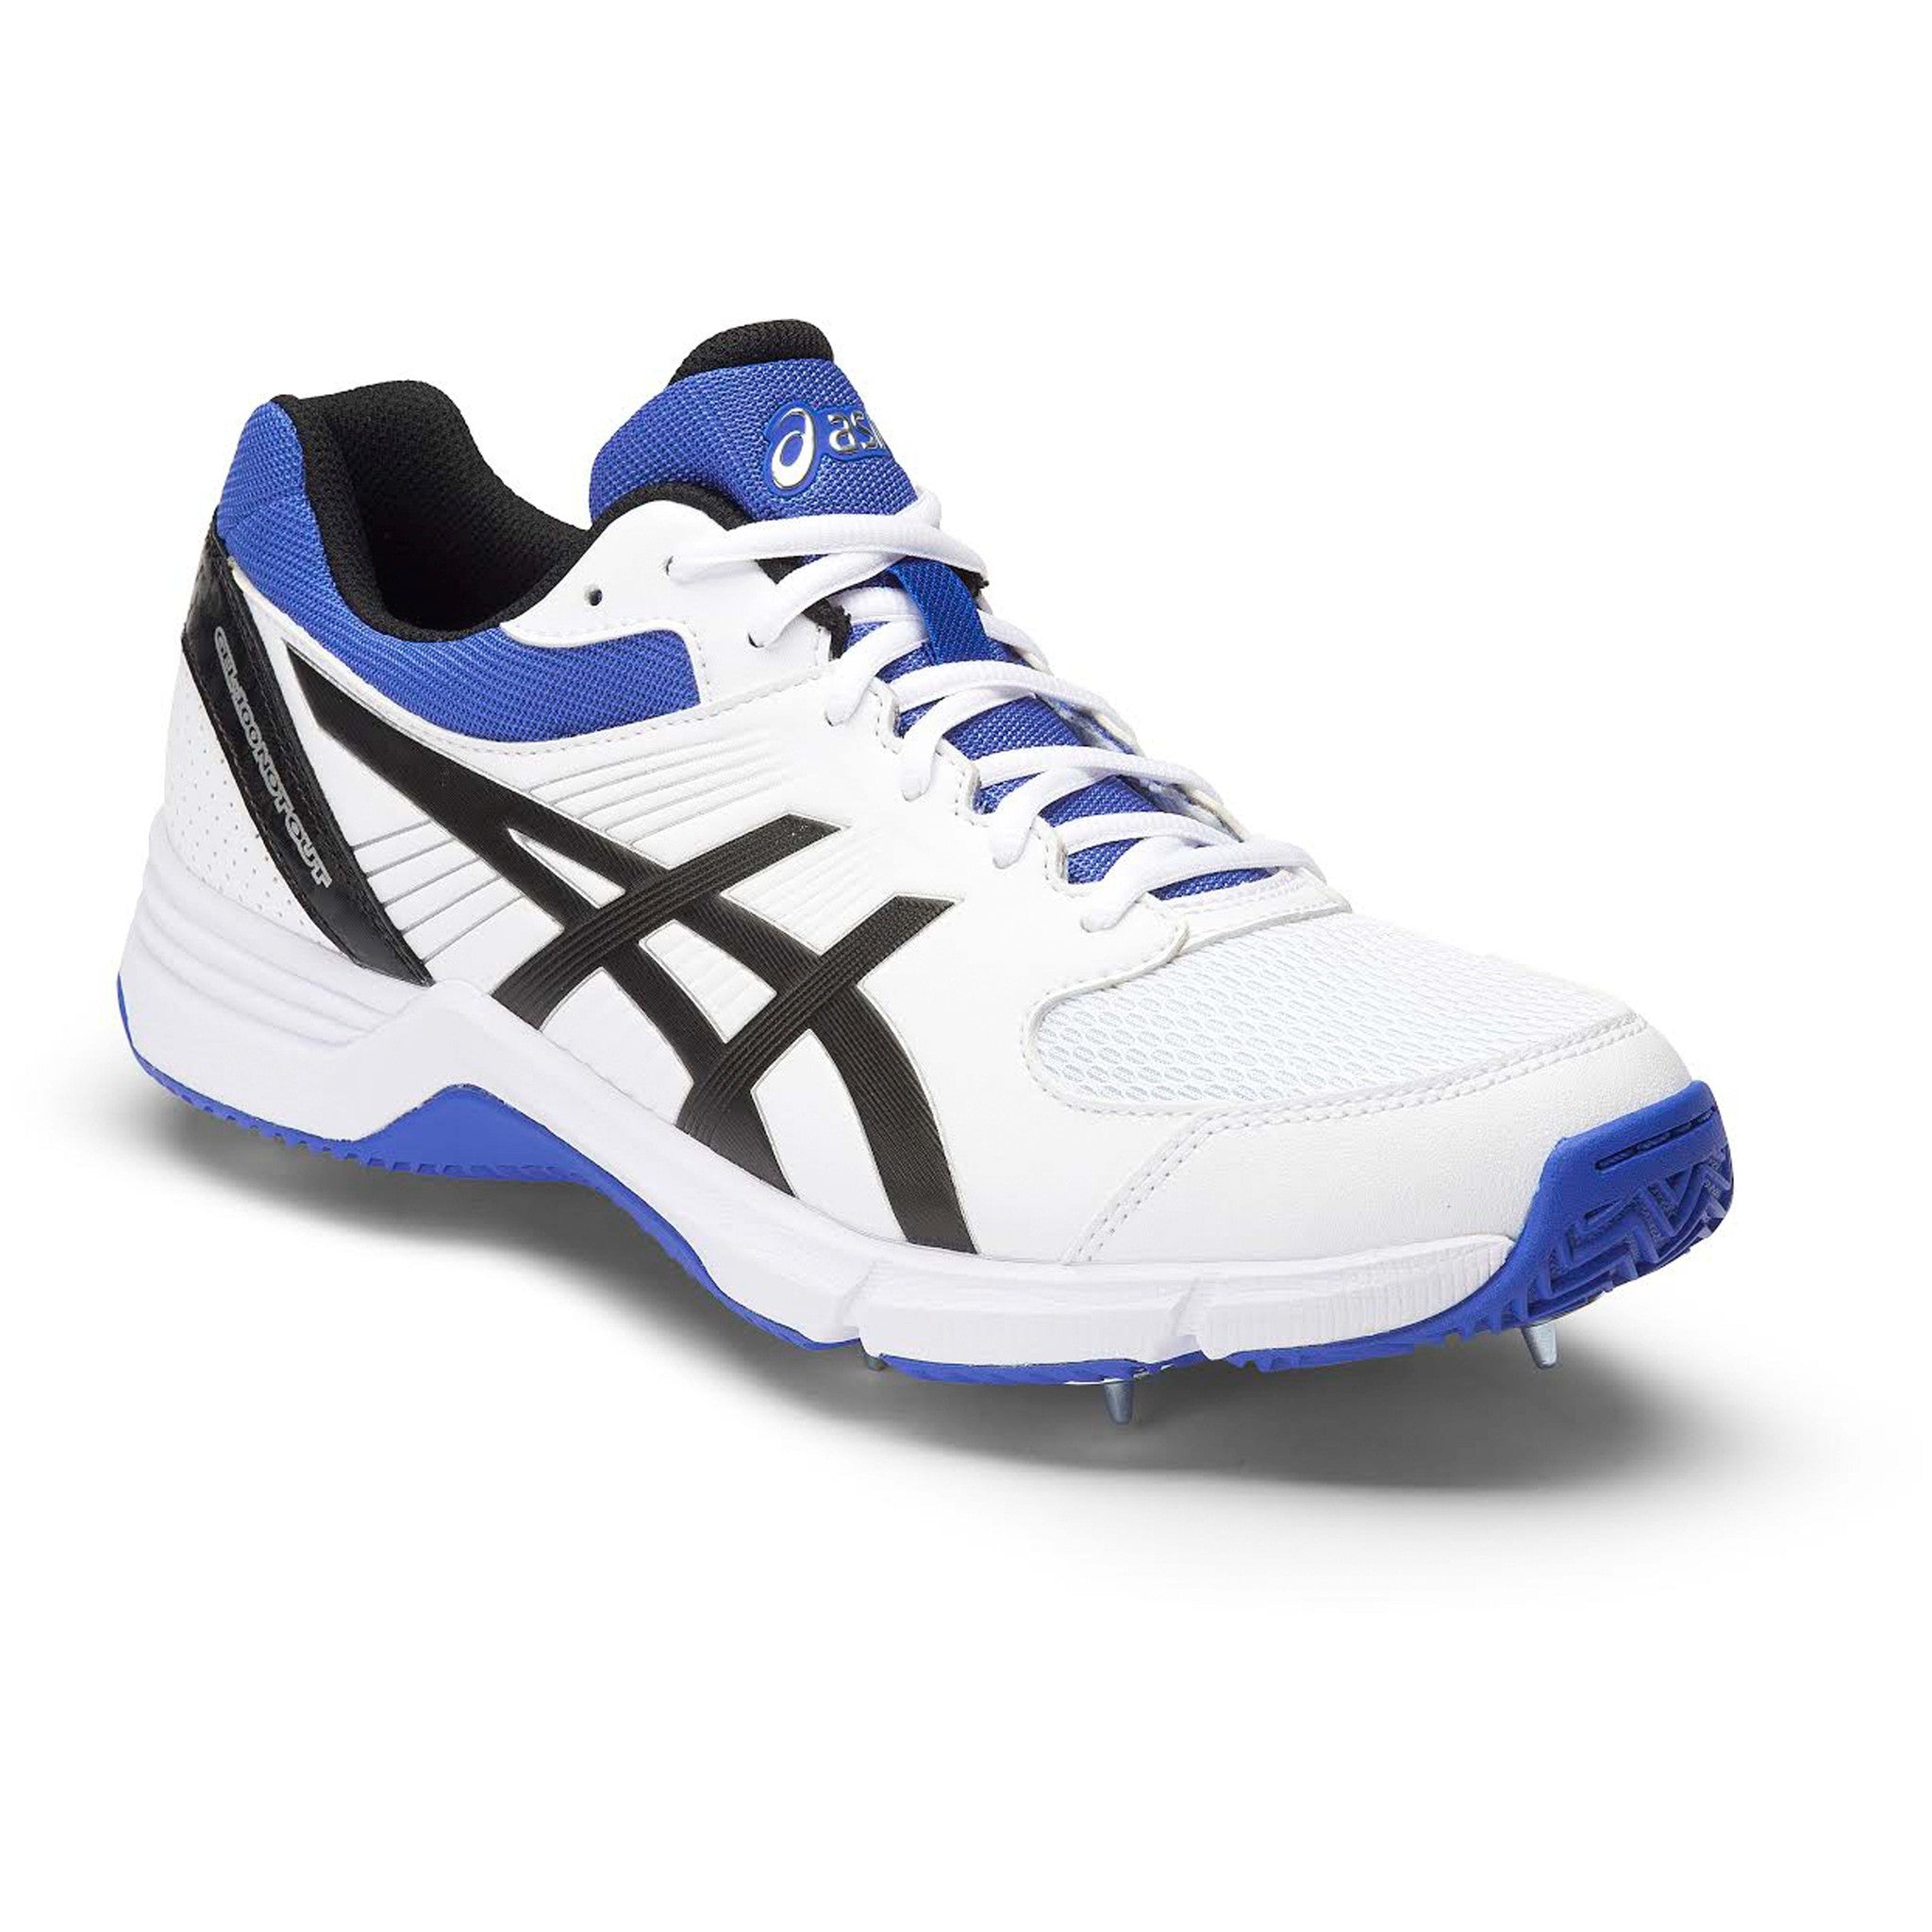 Asics Gel 100 Not Out Cricket Spikes - The Cricket Warehouse